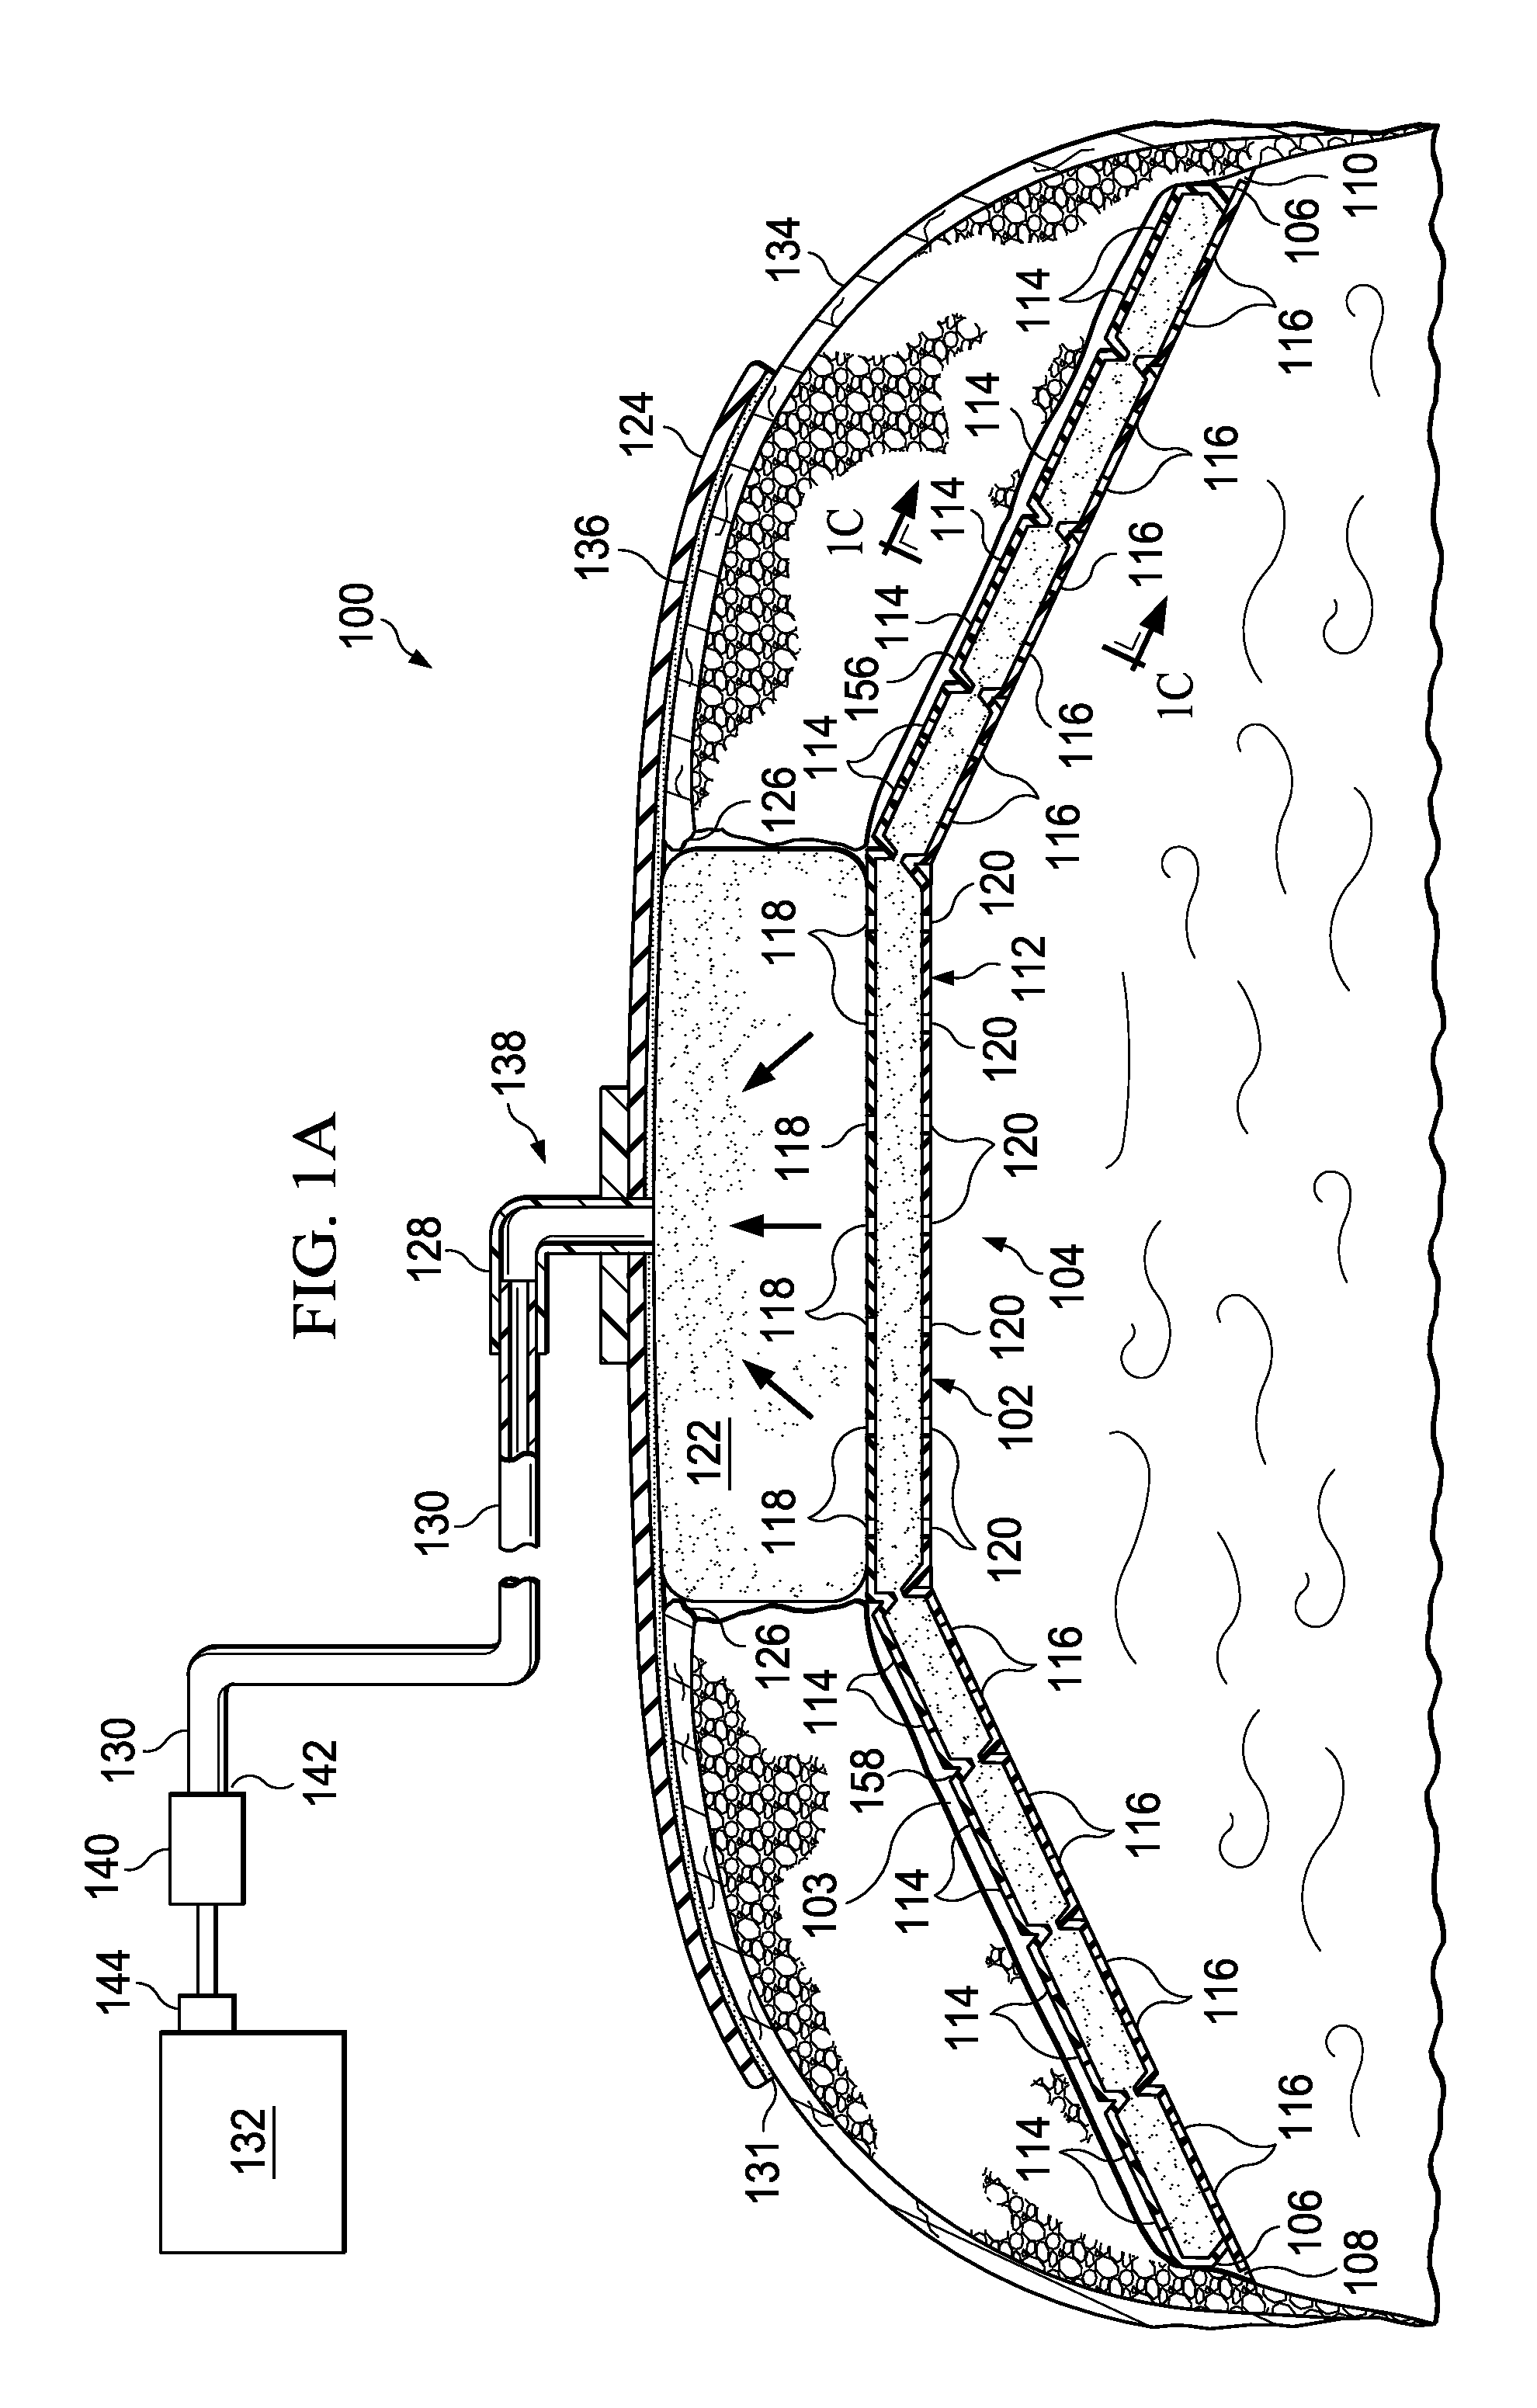 Systems and methods for controlling inflammatory response